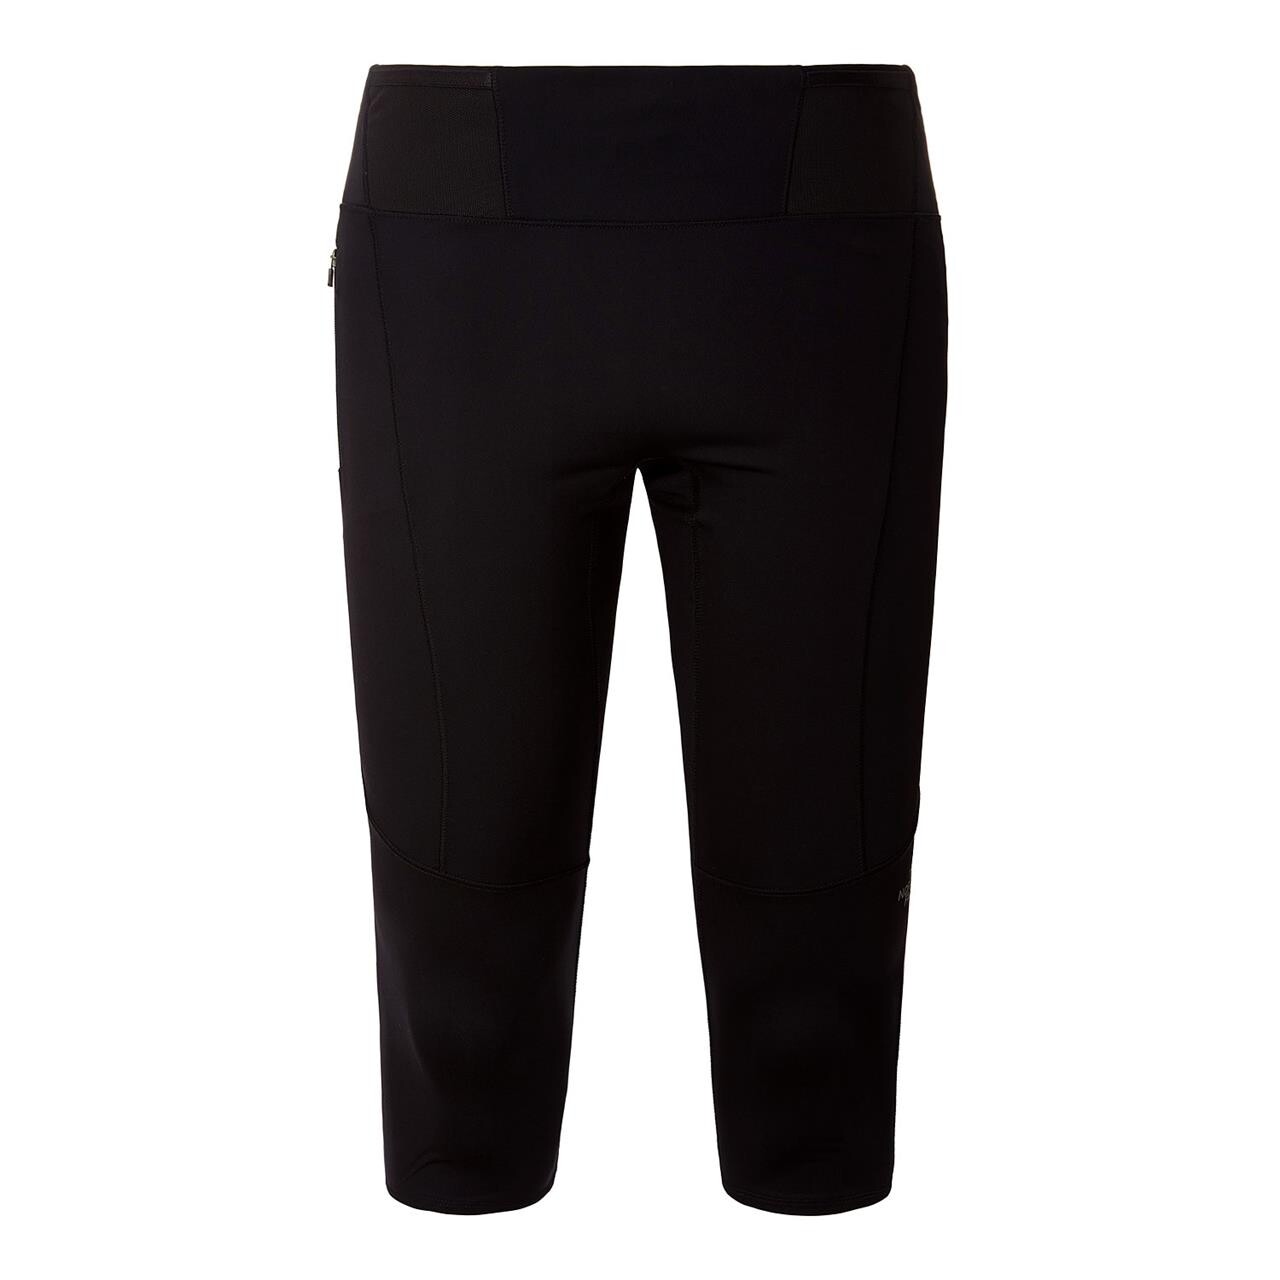 Billede af The North Face Womens Better Than Naked Capri (Sort (TNF BLACK) X-small)